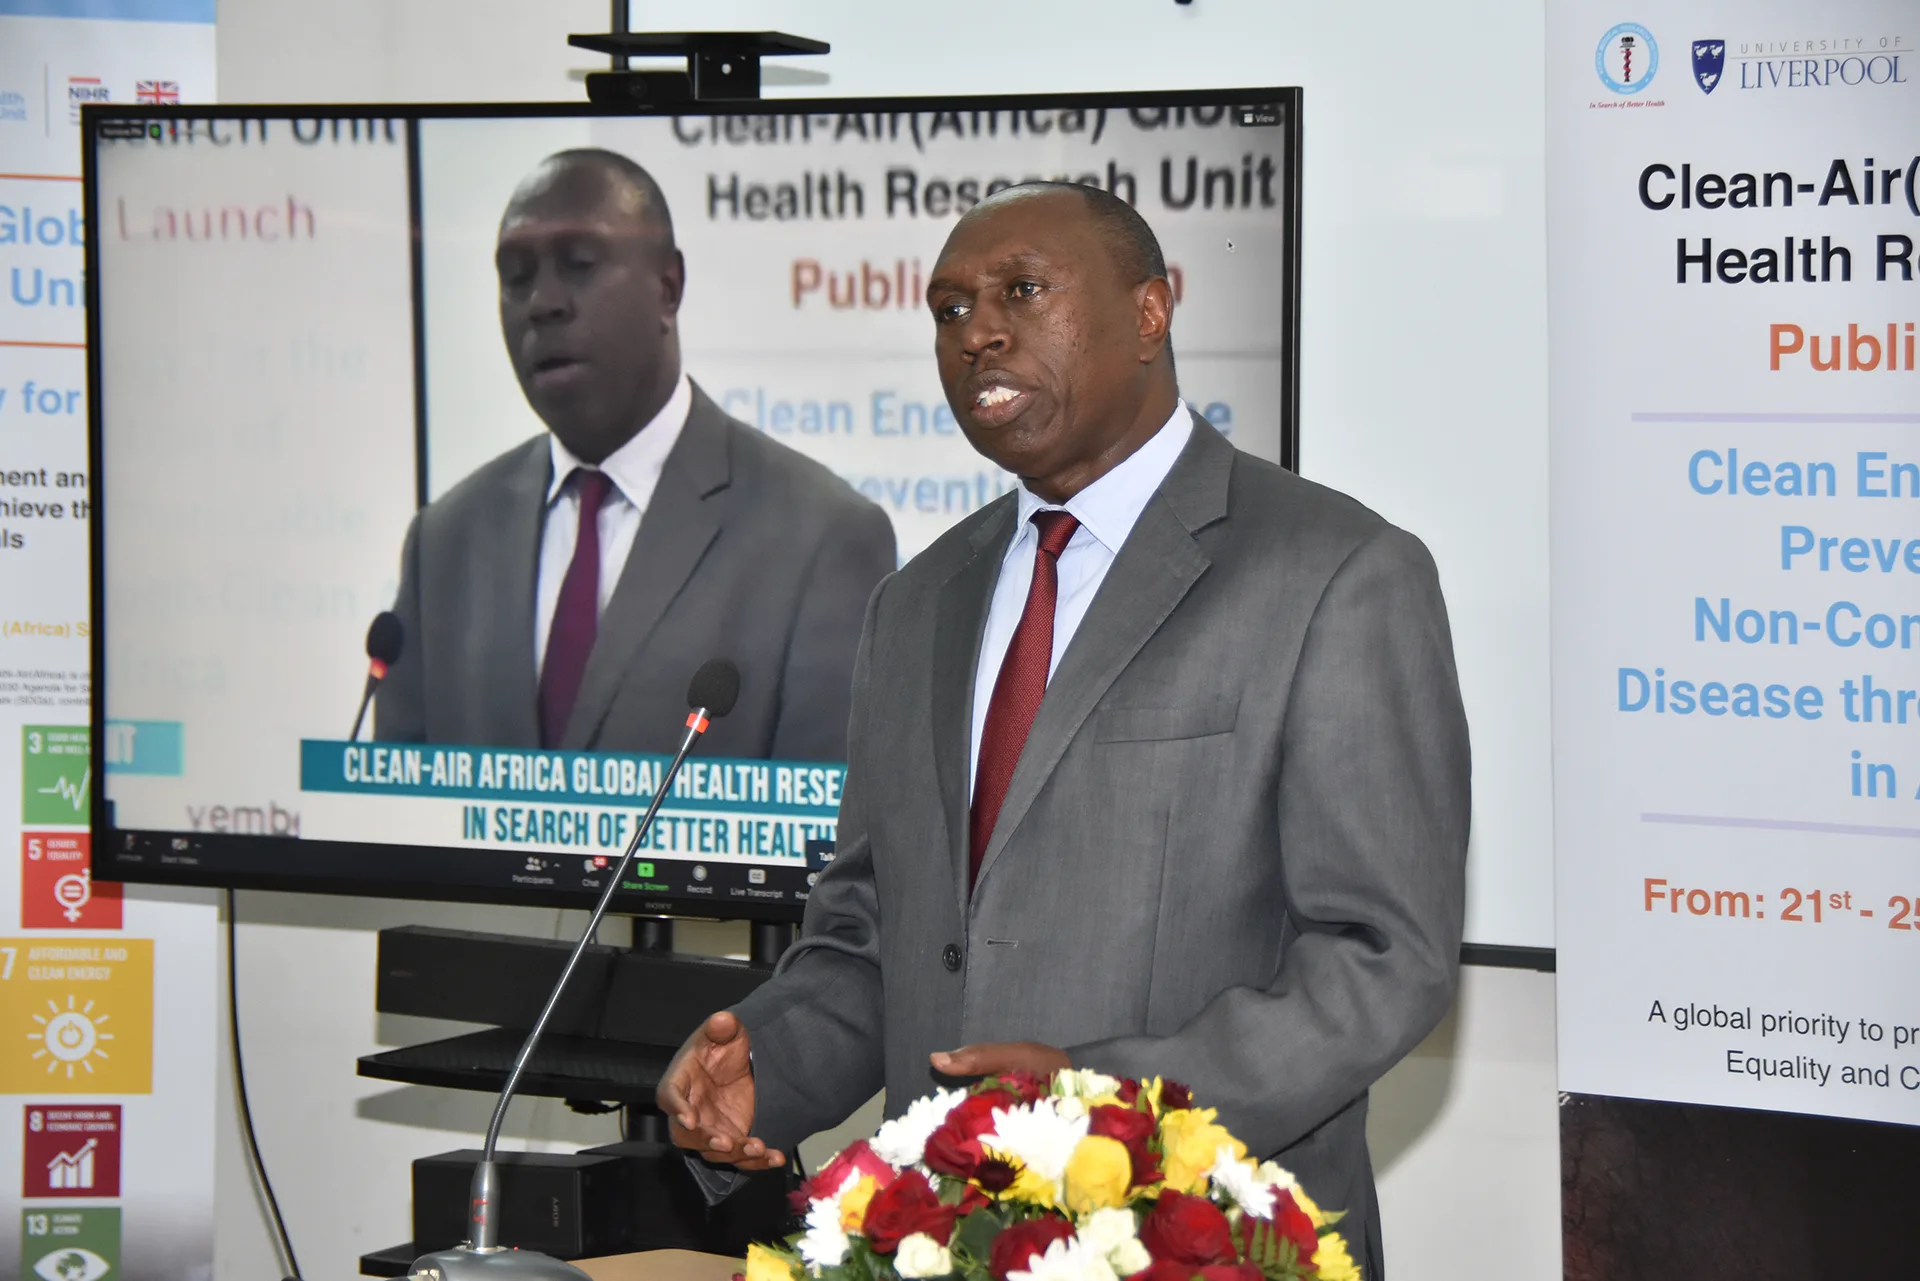 New Clean Energy Research Initiative for CLEAN-Air(Africa) Launched at KEMRI (Video)